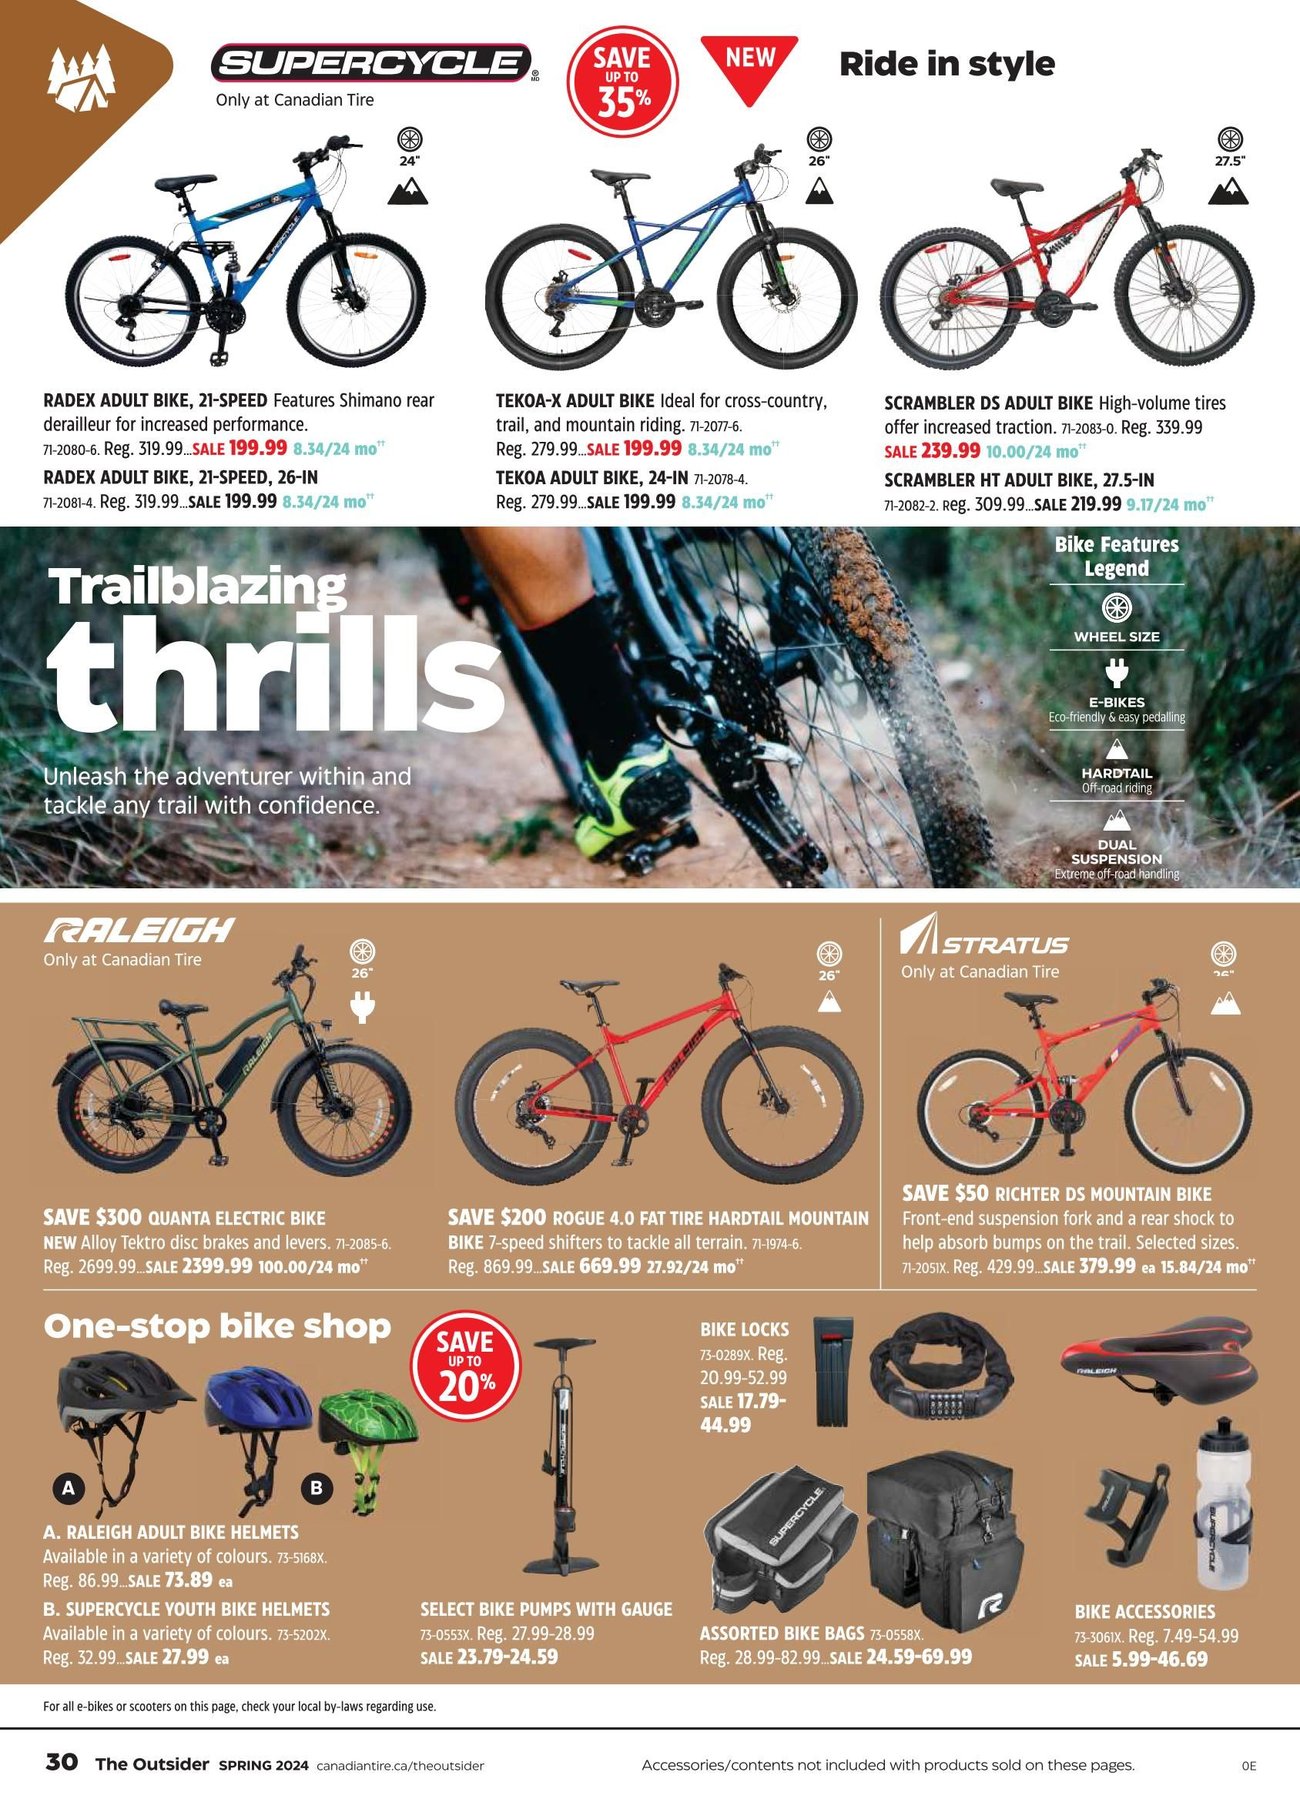 Canadian Tire - The Outsider - Page 30